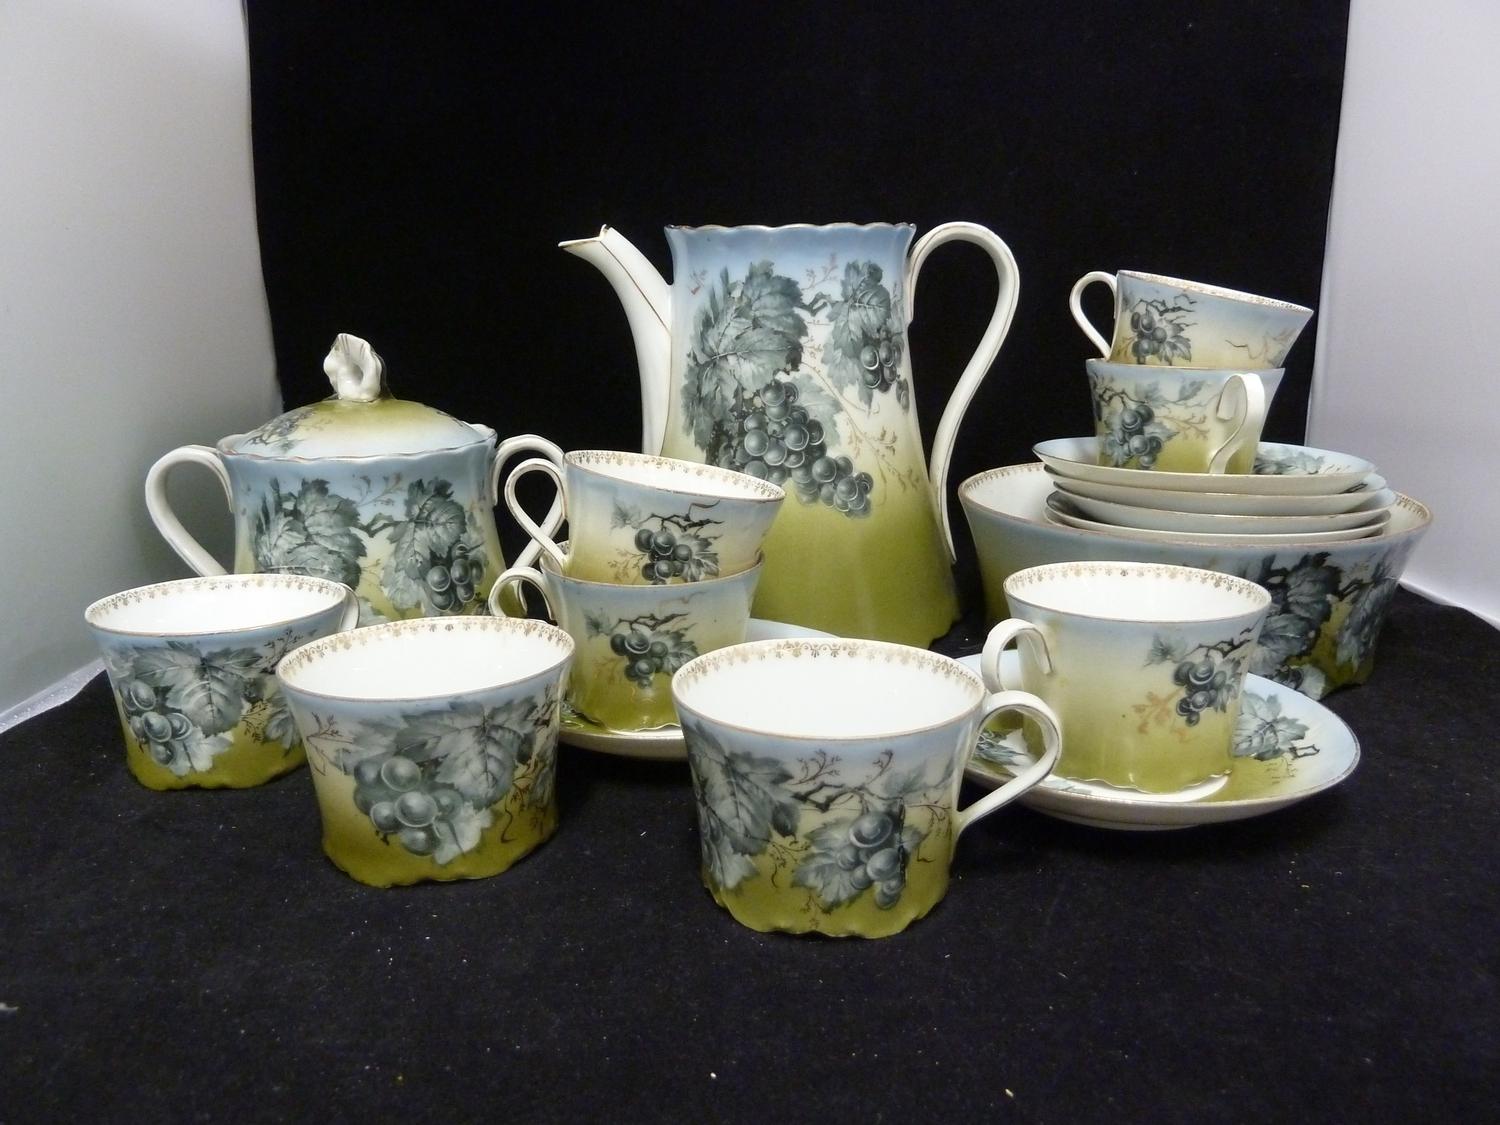 Kusnetzov Porcelain Manufactory, Russia - A pre-revolution Coffee service, printed in blue with